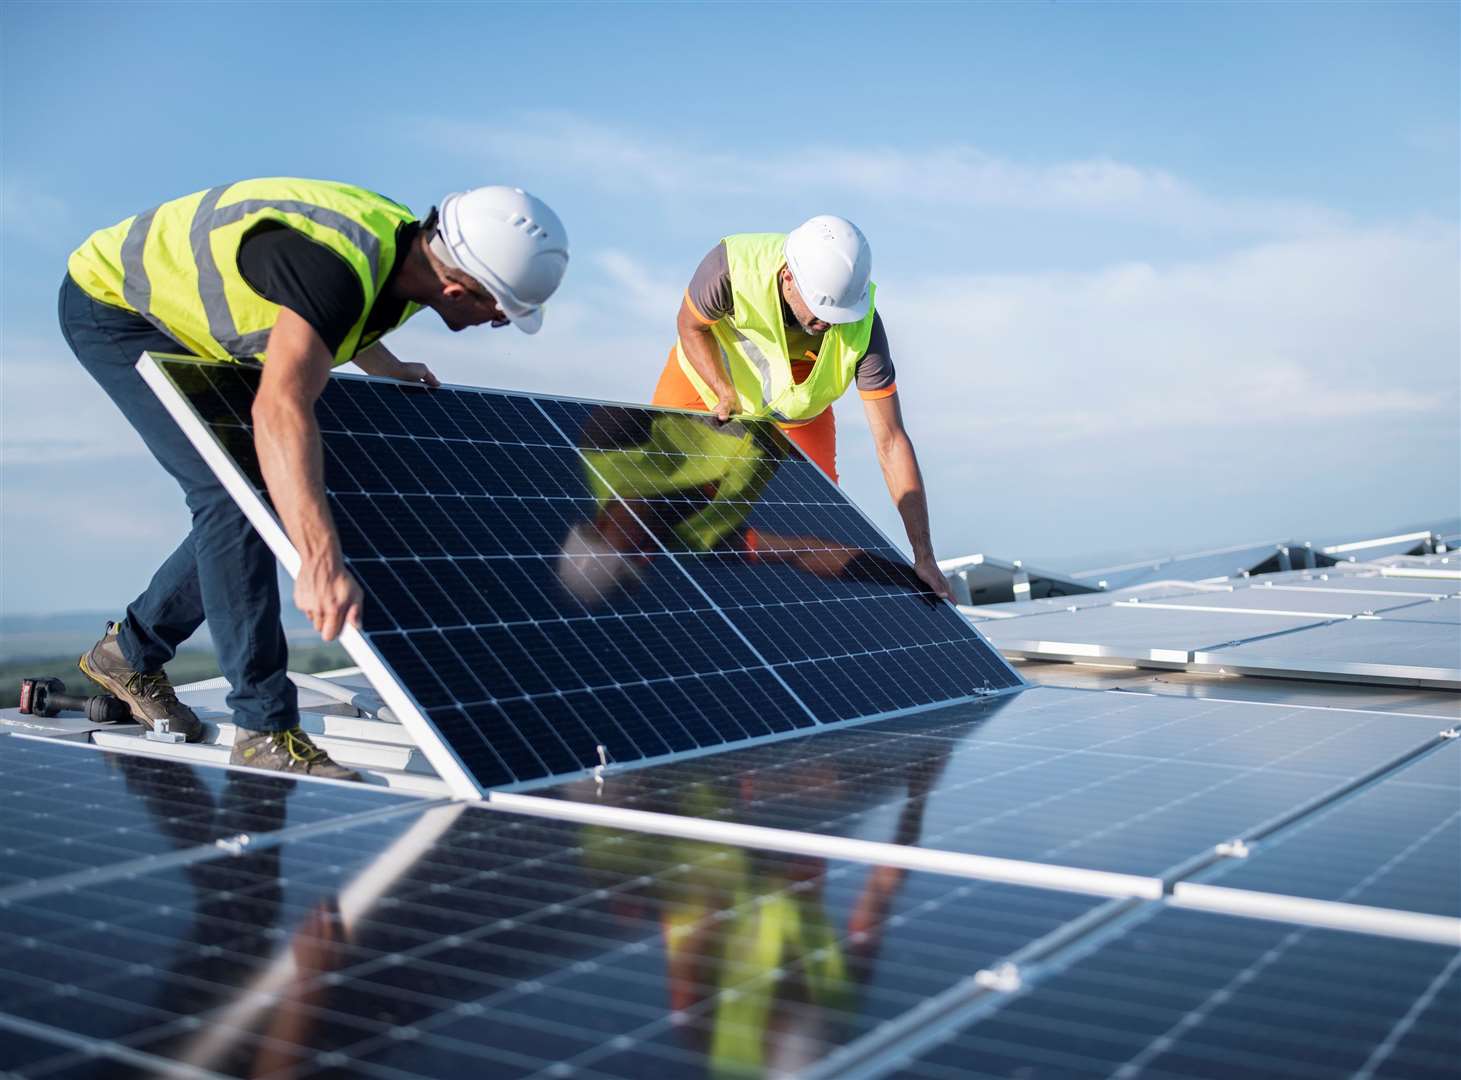 More solar panels have been installed over the last few years as Medway Council seeks to meet its carbon goals. Photo: Stock